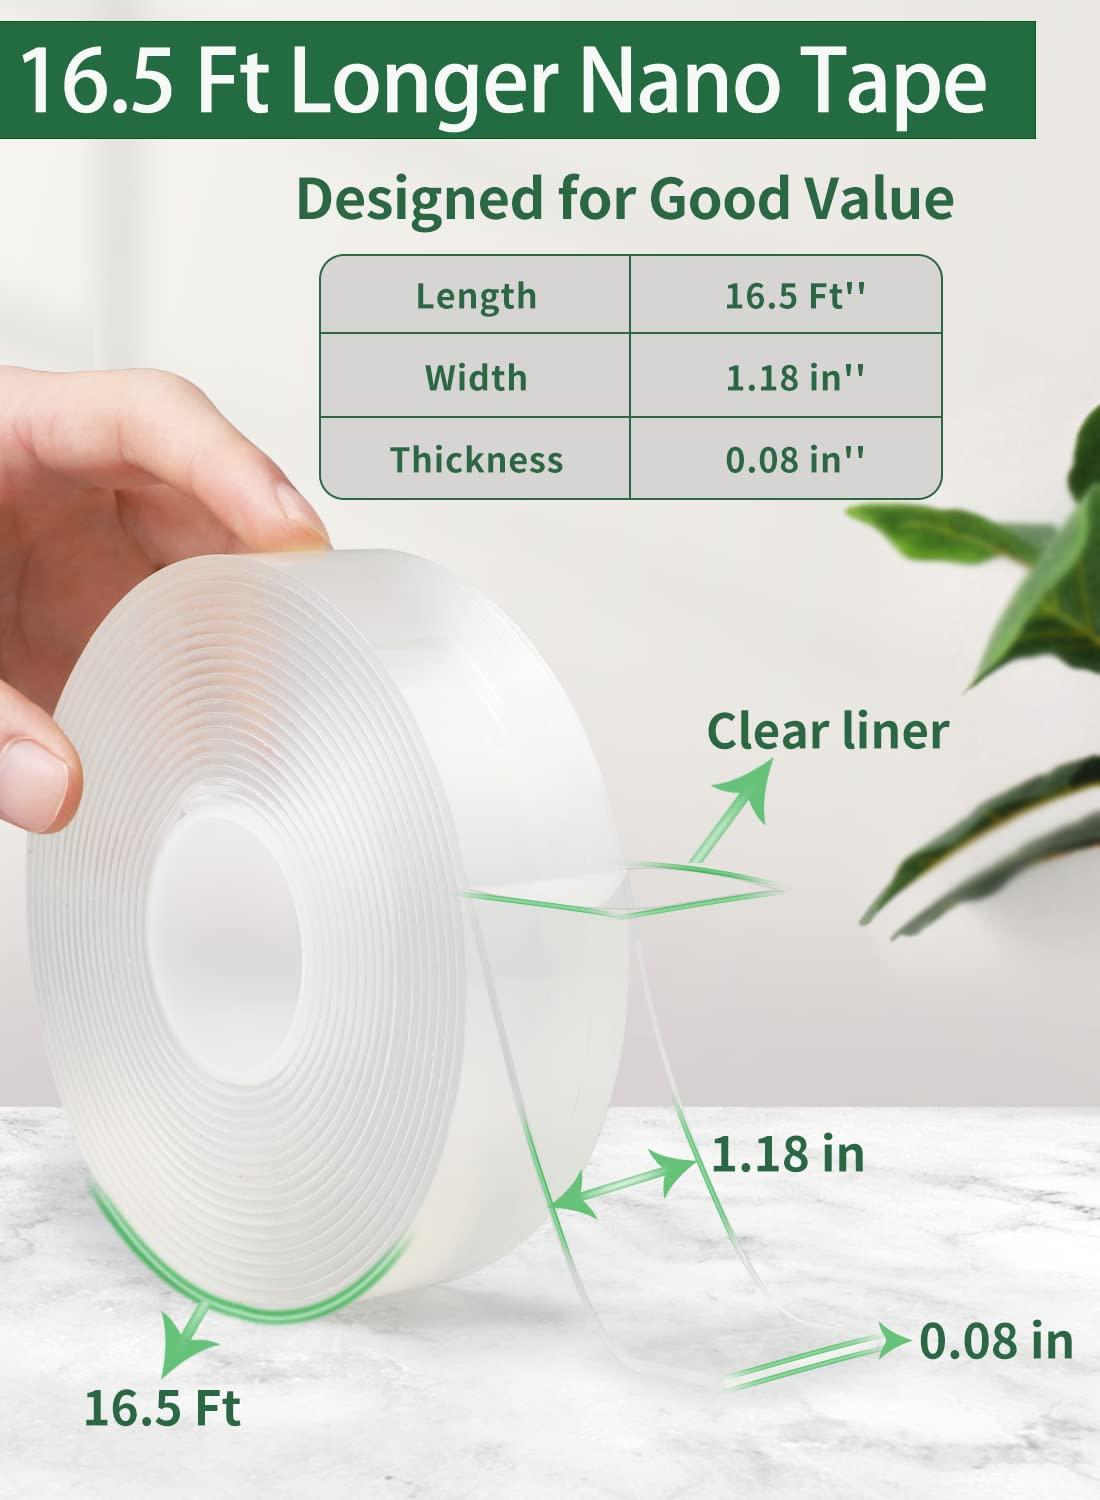 1.18 Wide Double Sided Tape Heavy Duty,Nano Double Sided Adhesive Tape,Picture Hanging Tape, Removable, Reusable Sticky Poster Tape for Walls Decor